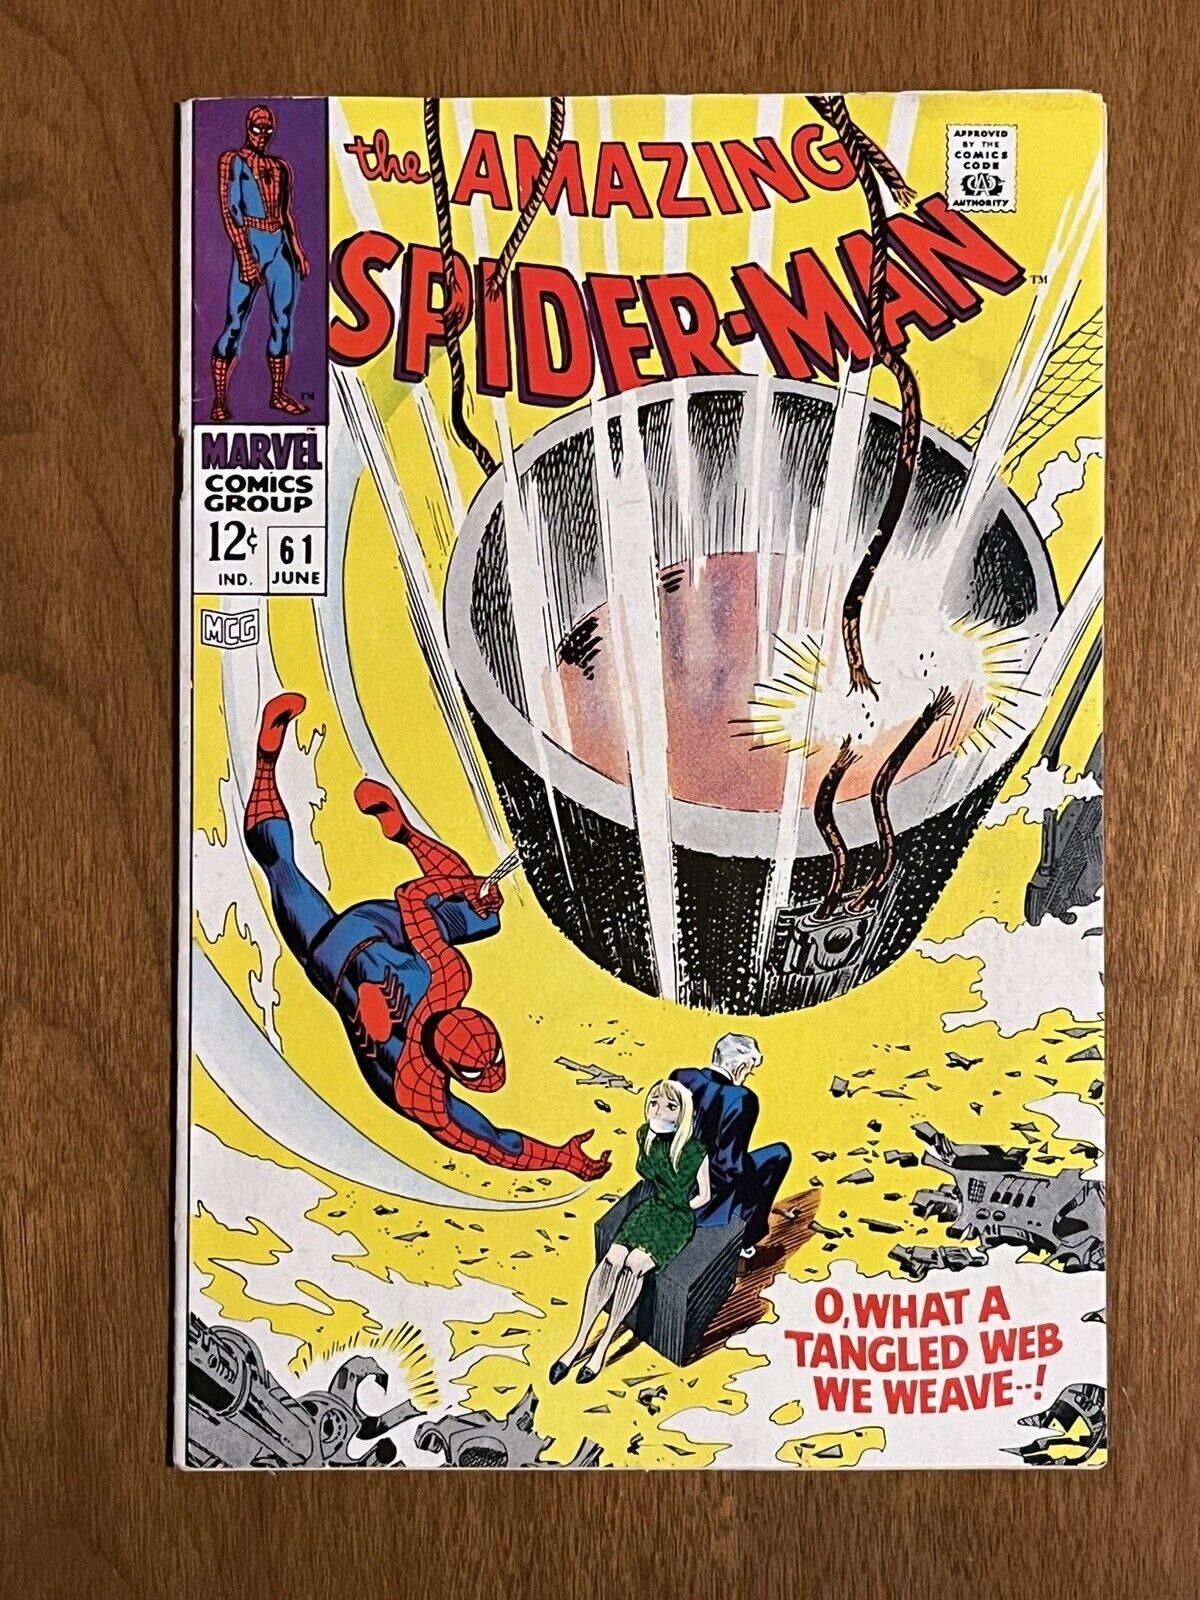 The Amazing Spider-Man #61/Silver Age Marvel Comic Book/1st Gwen Stacy Cover/VF-